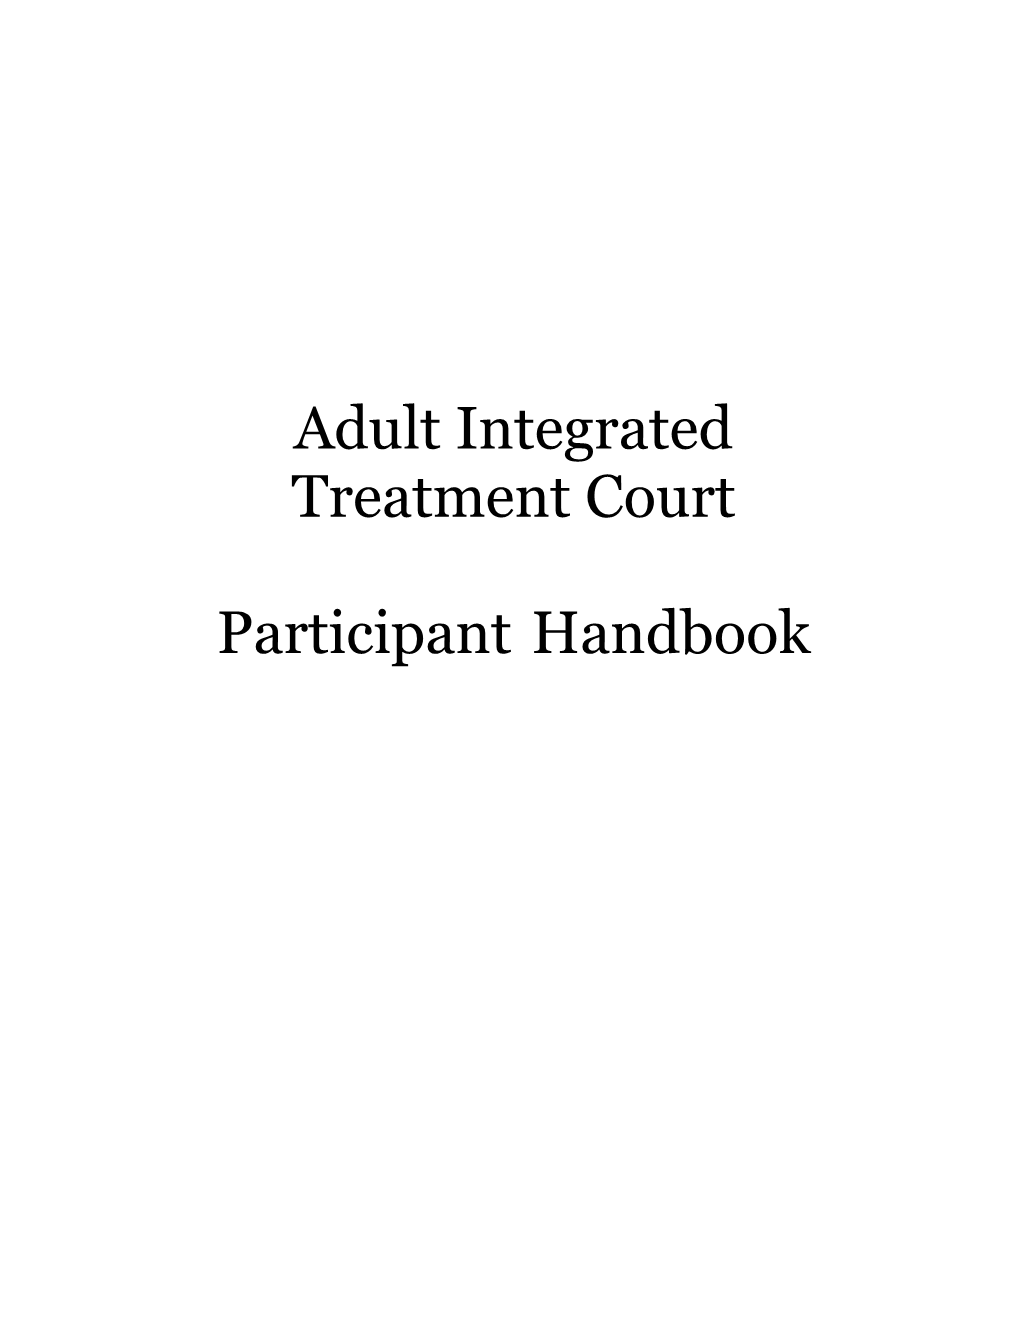 Adult Integrated Treatment Court